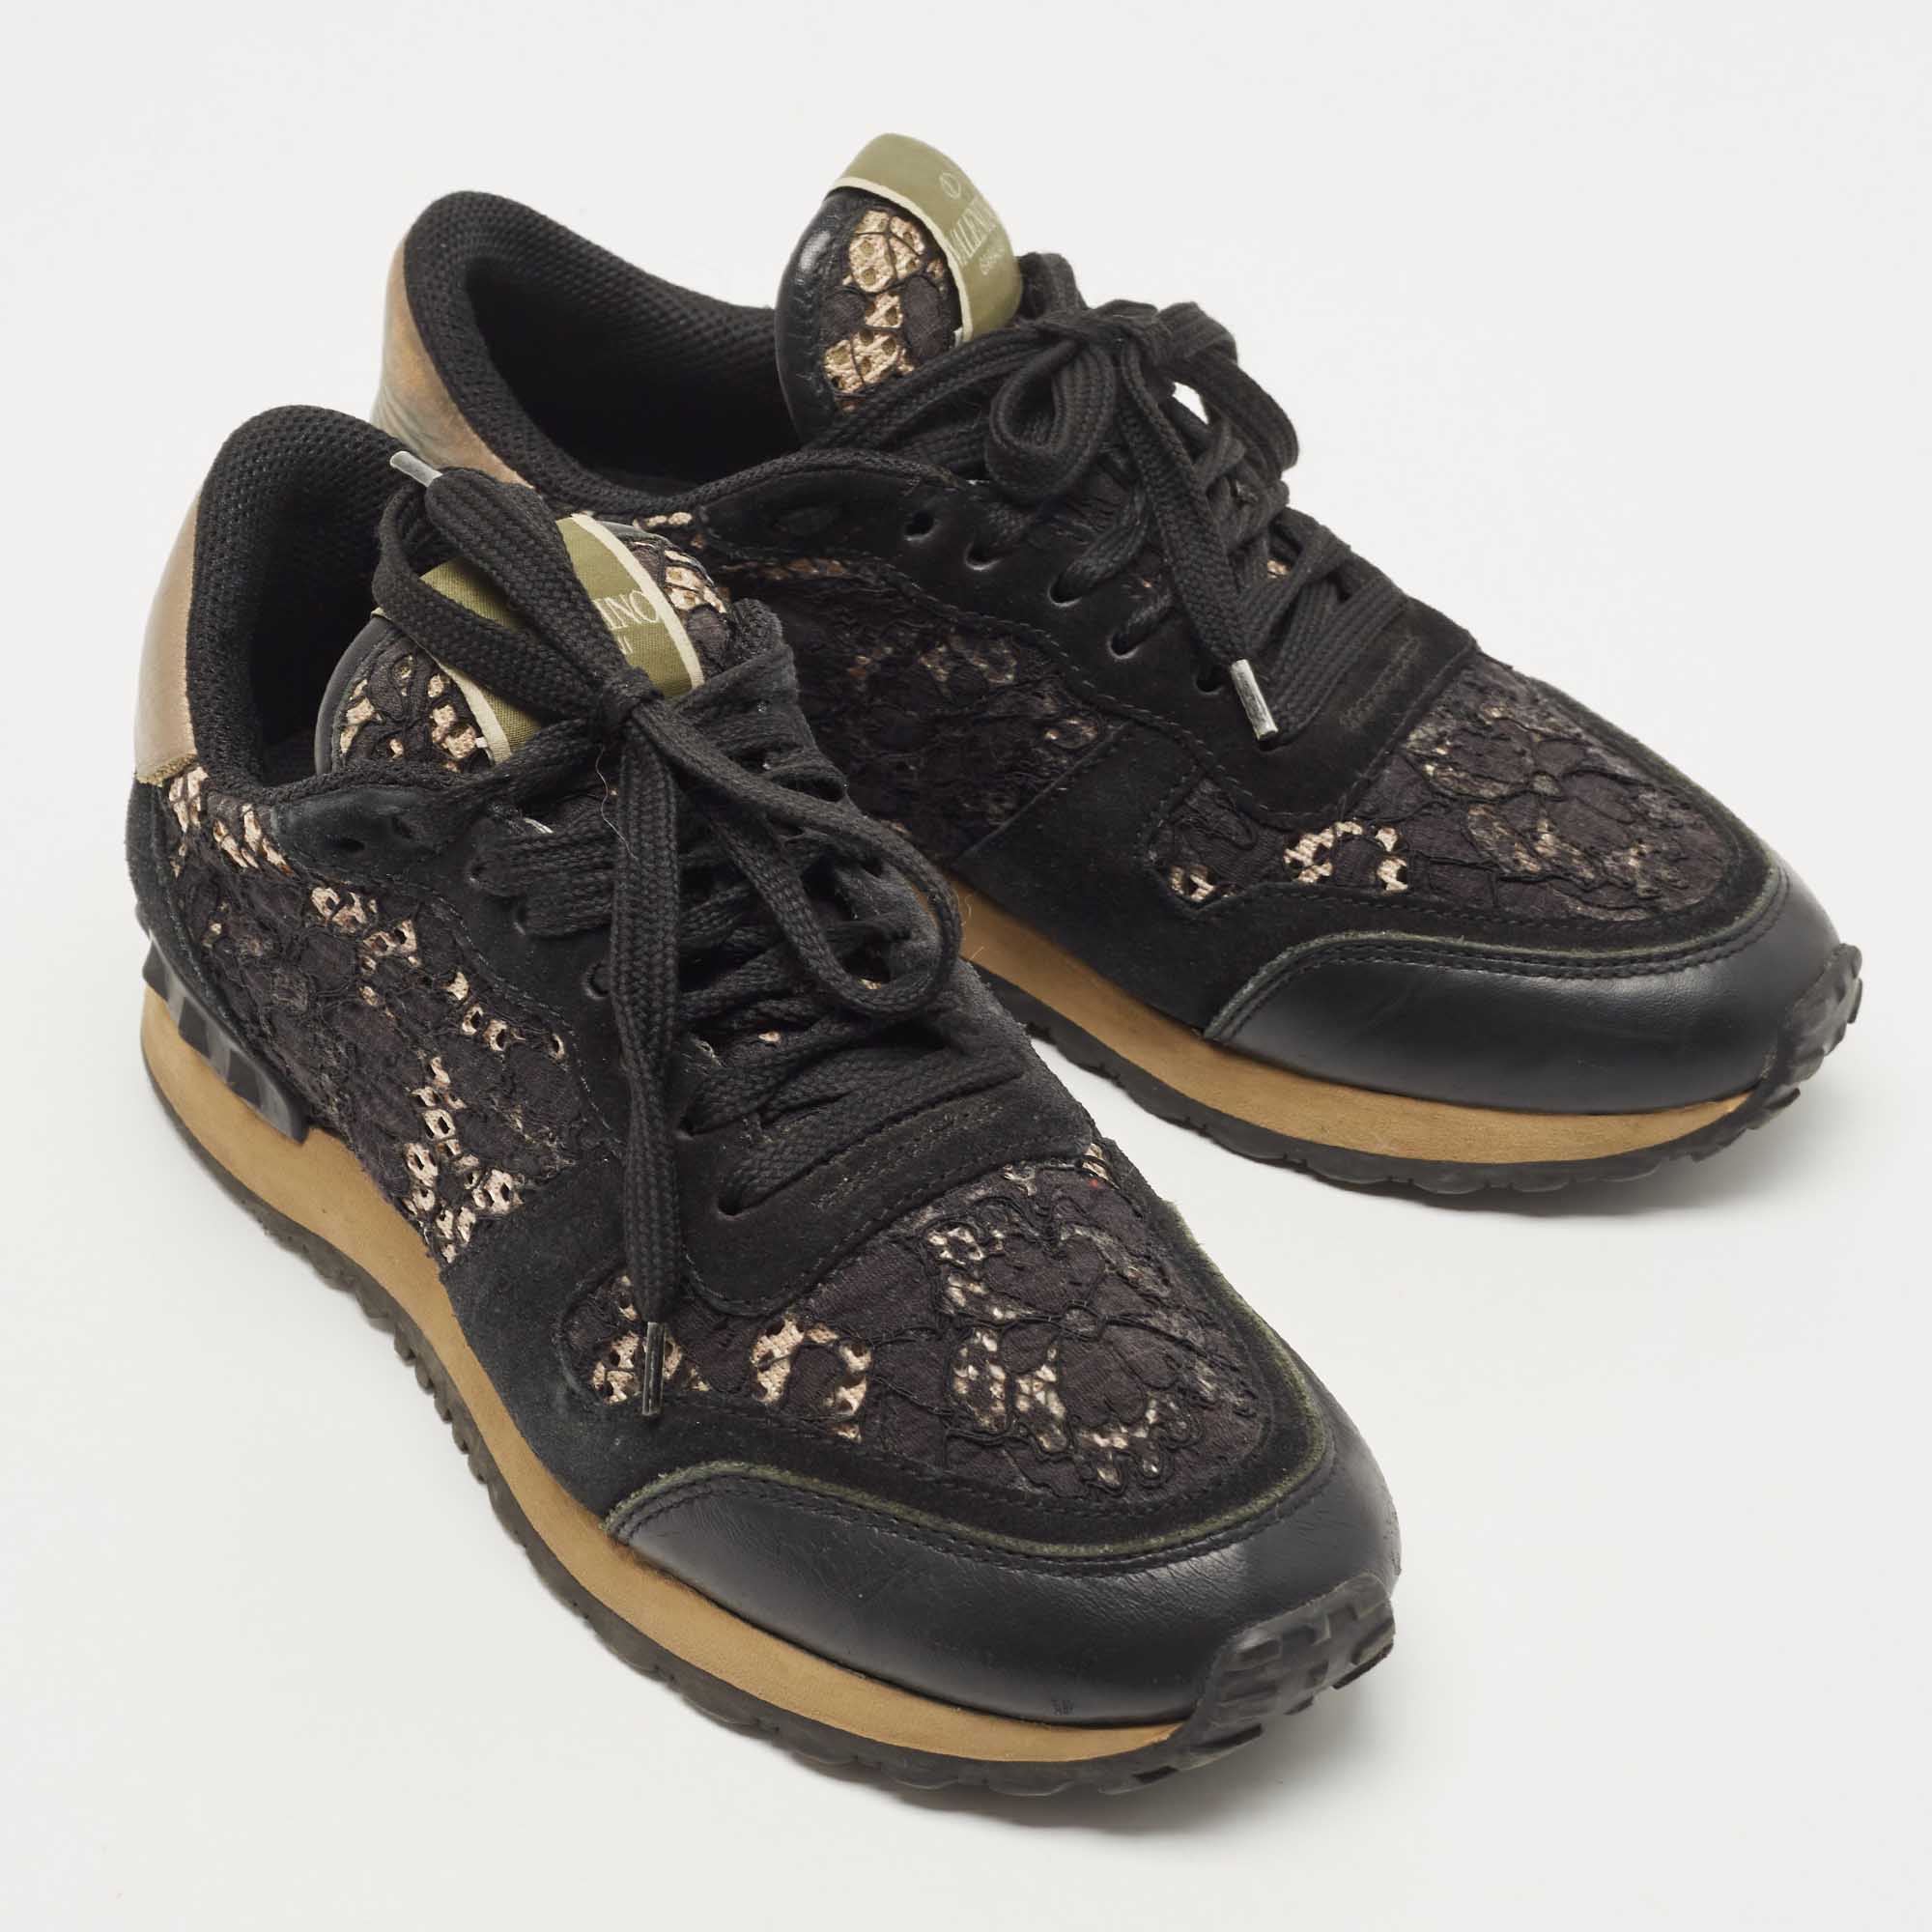 Valentino Black Leather And Suede Rockrunner Sneakers Size 37.5